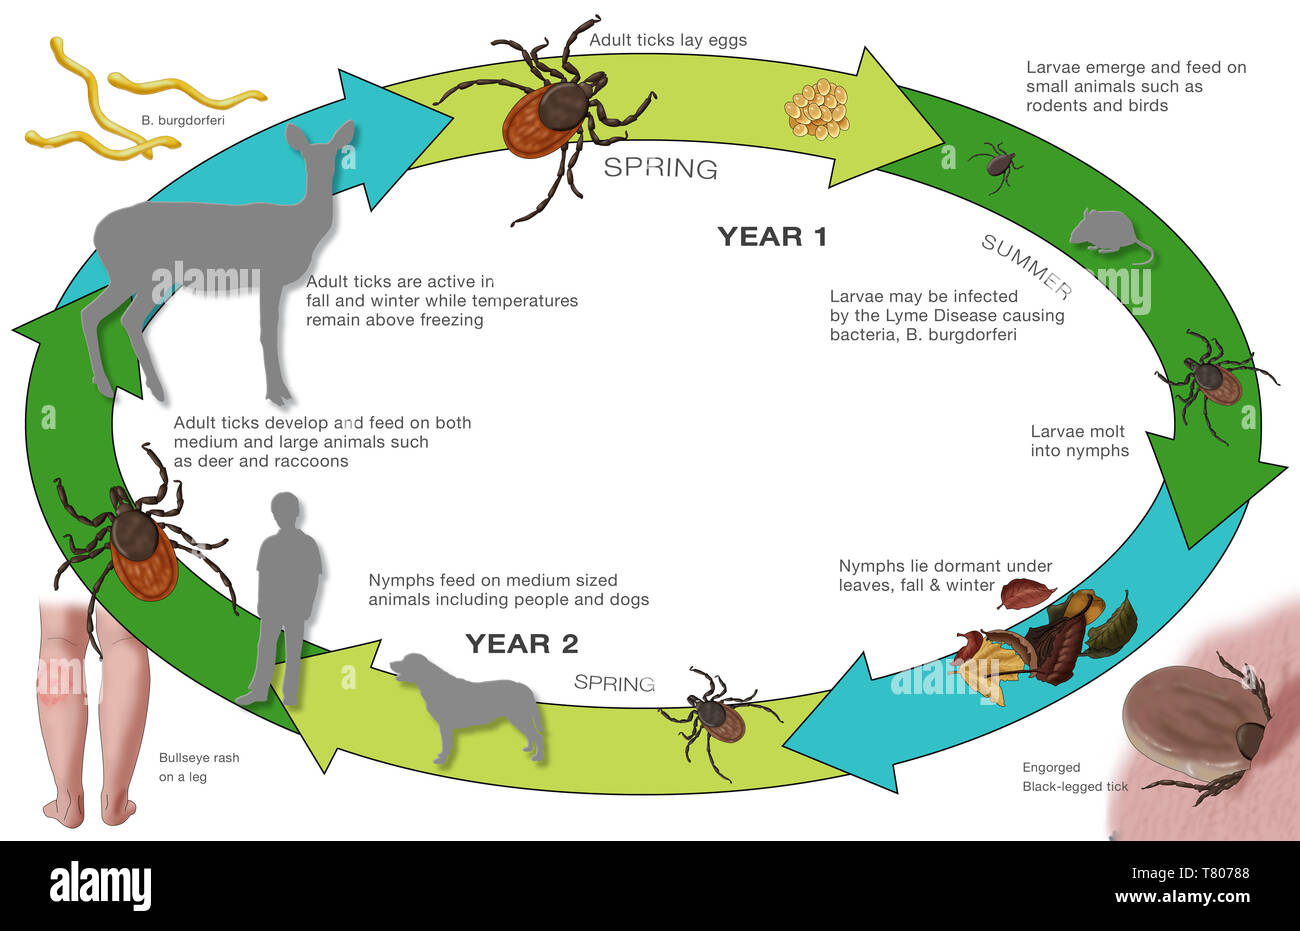 Life Cycle of the Black-legged Tick and Lyme, Illustration Stock Photo